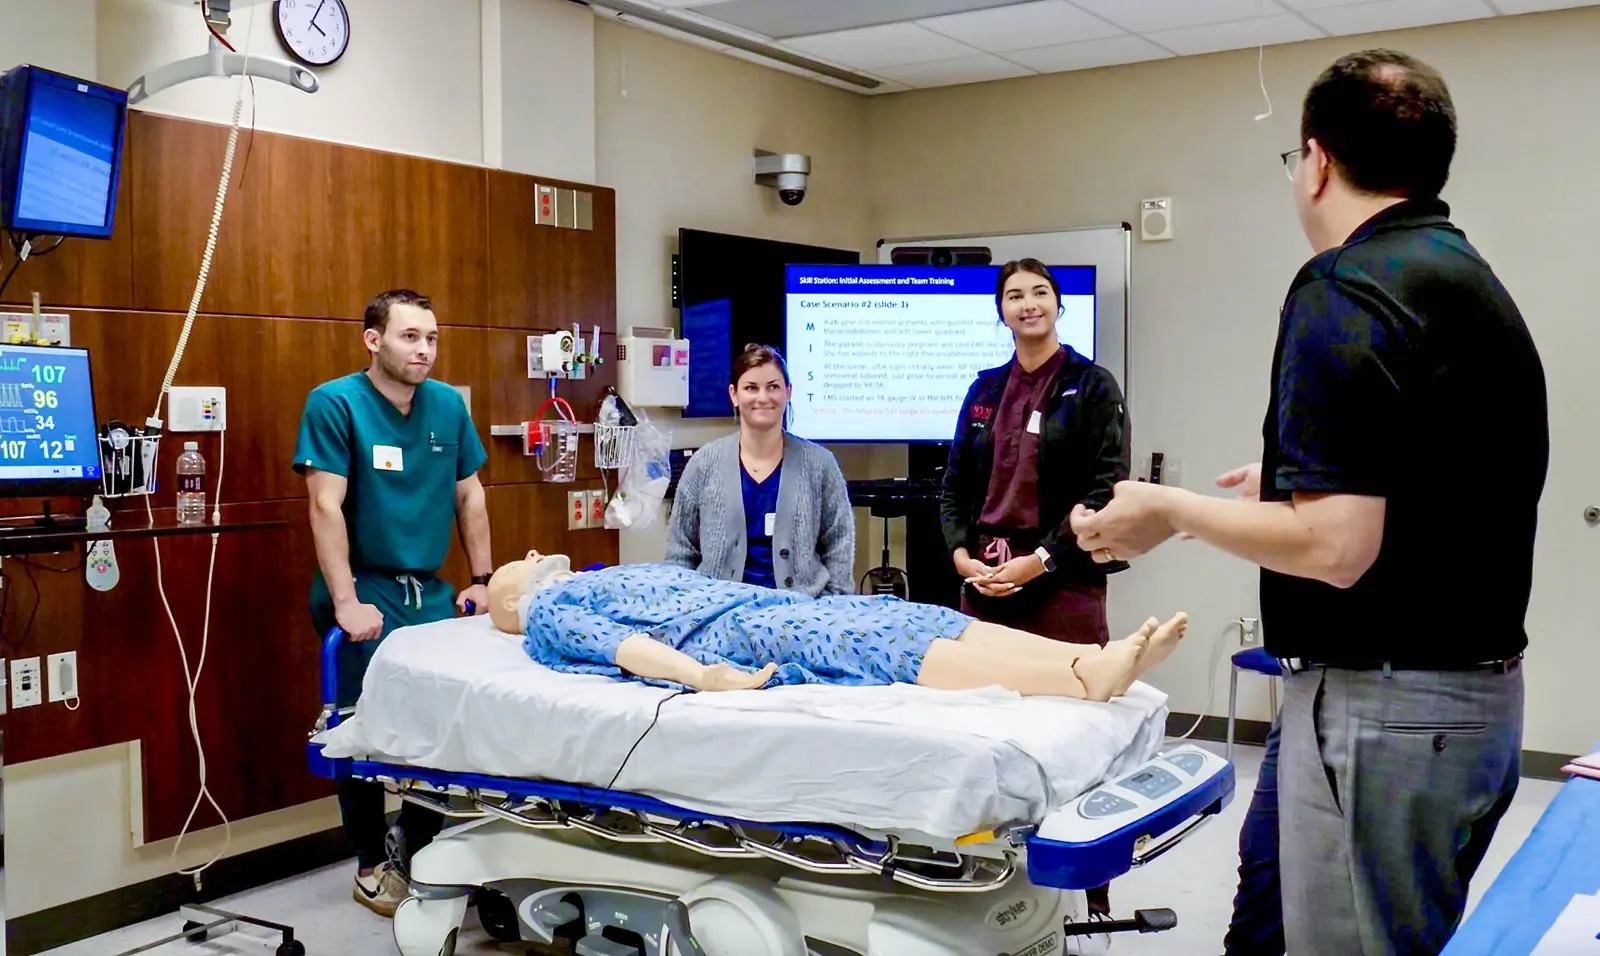 CAMLS A group of medical professionals stand around a hospital bed with a medical mannequin lying on it. A person is teaching from a screen displaying educational content. They are in a clinical setting, likely engaged in a training or simulation session.